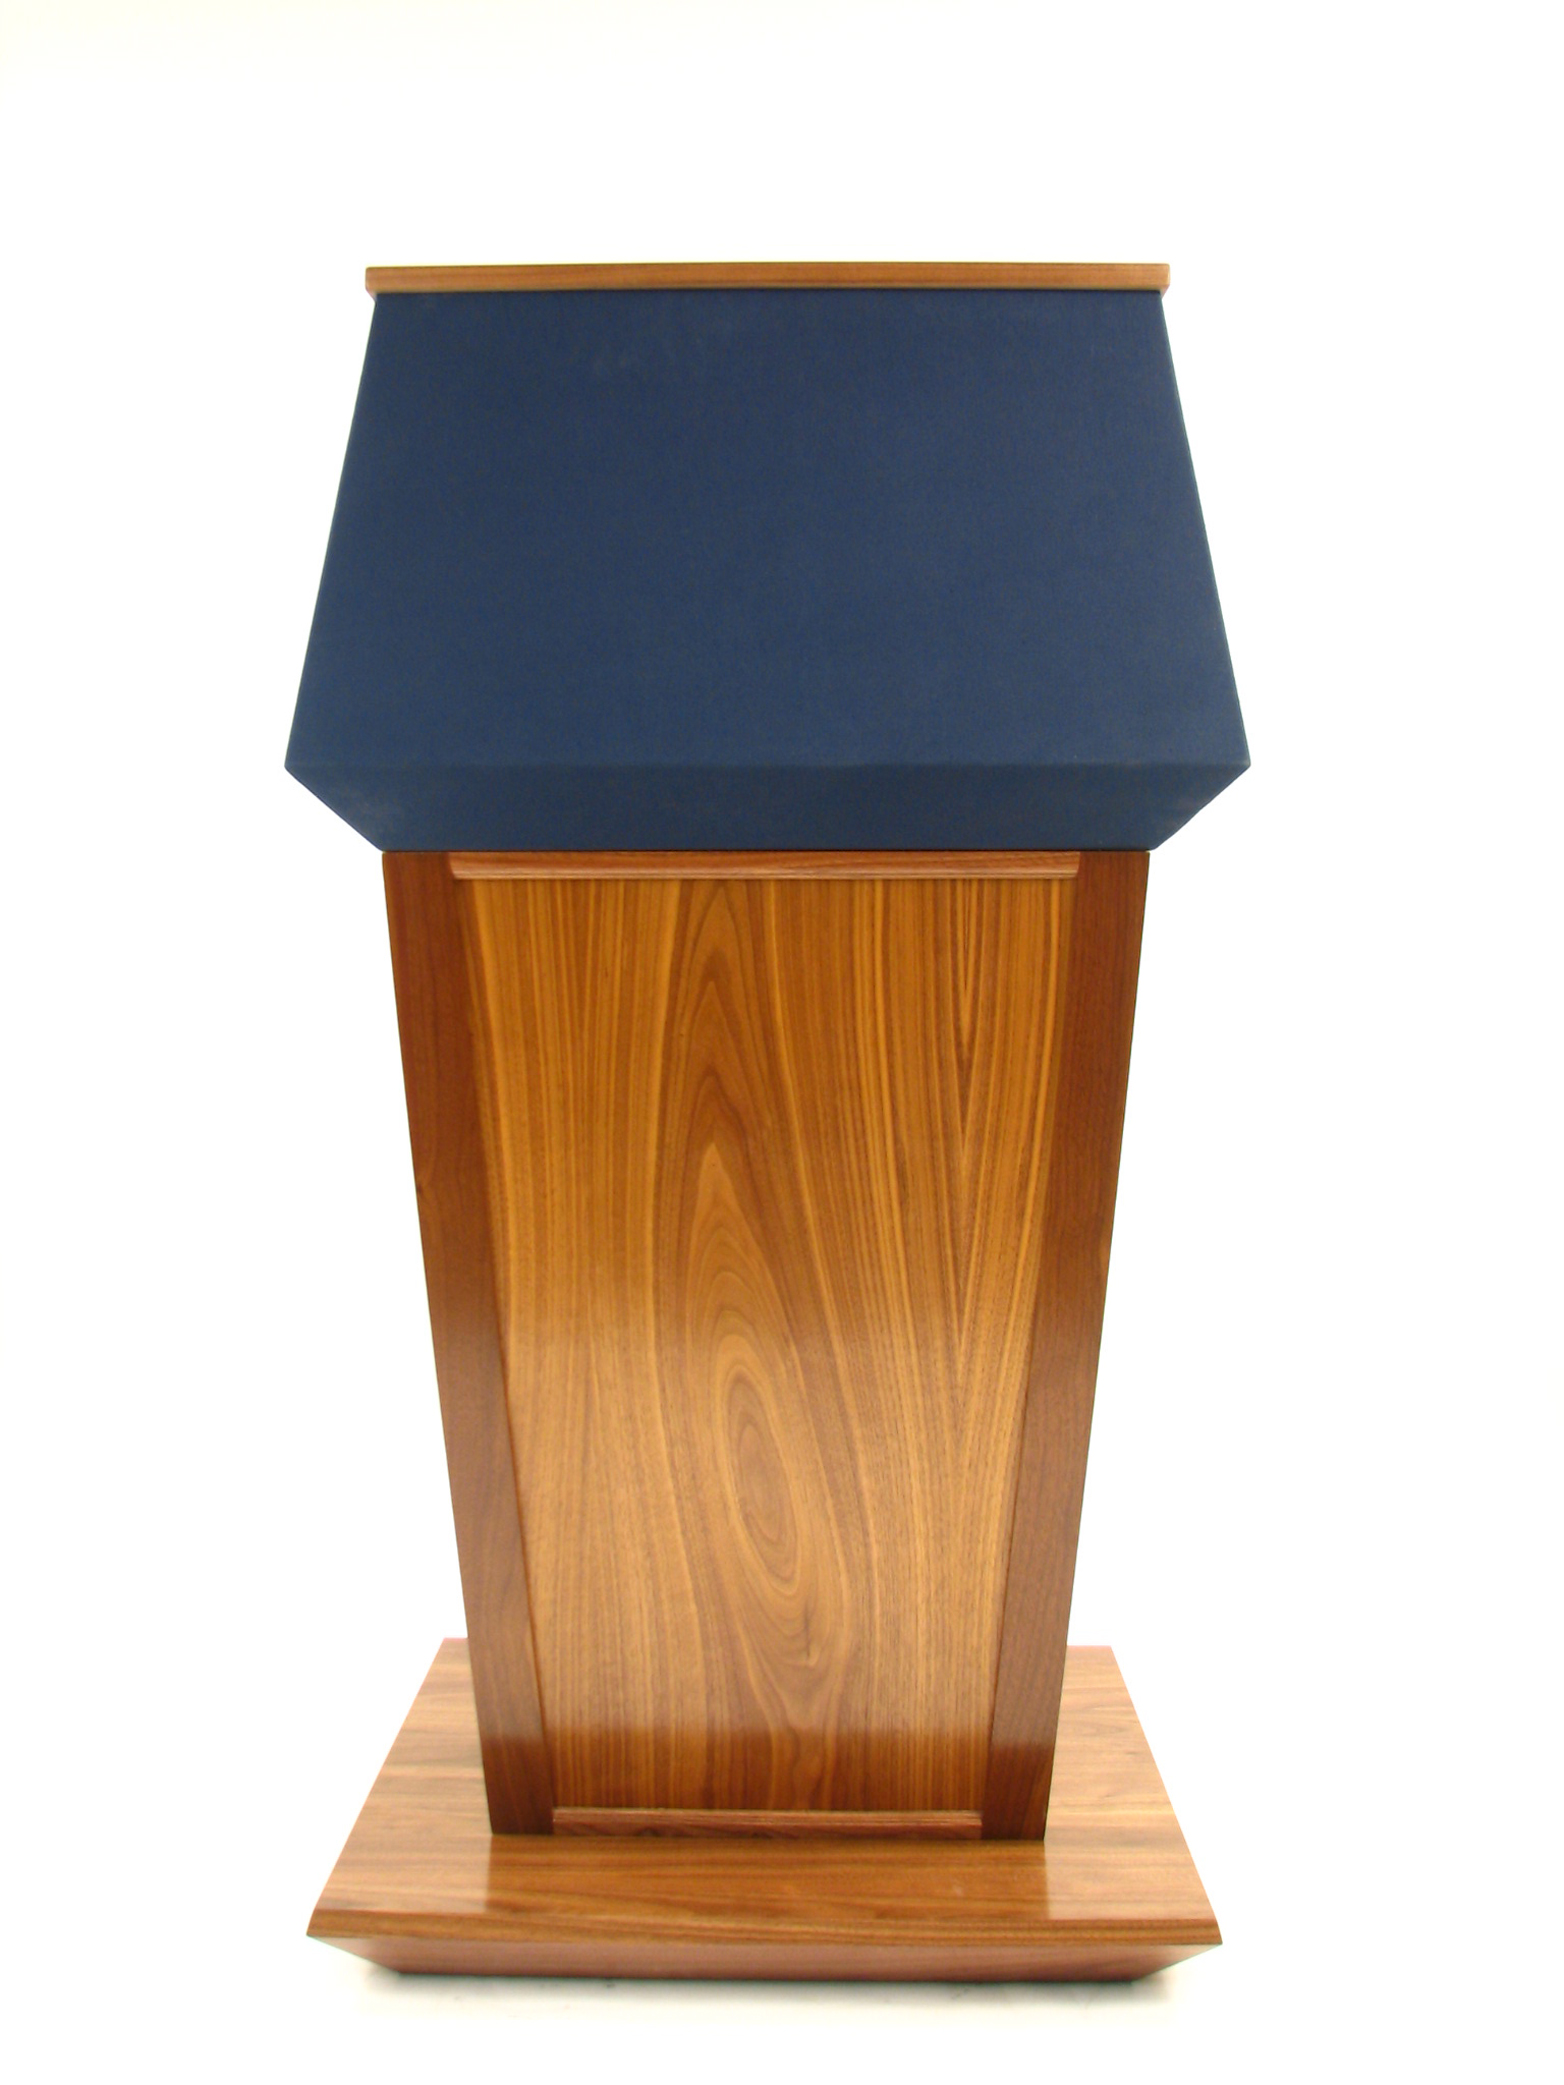 Free president cliparts download. Podium clipart presidential